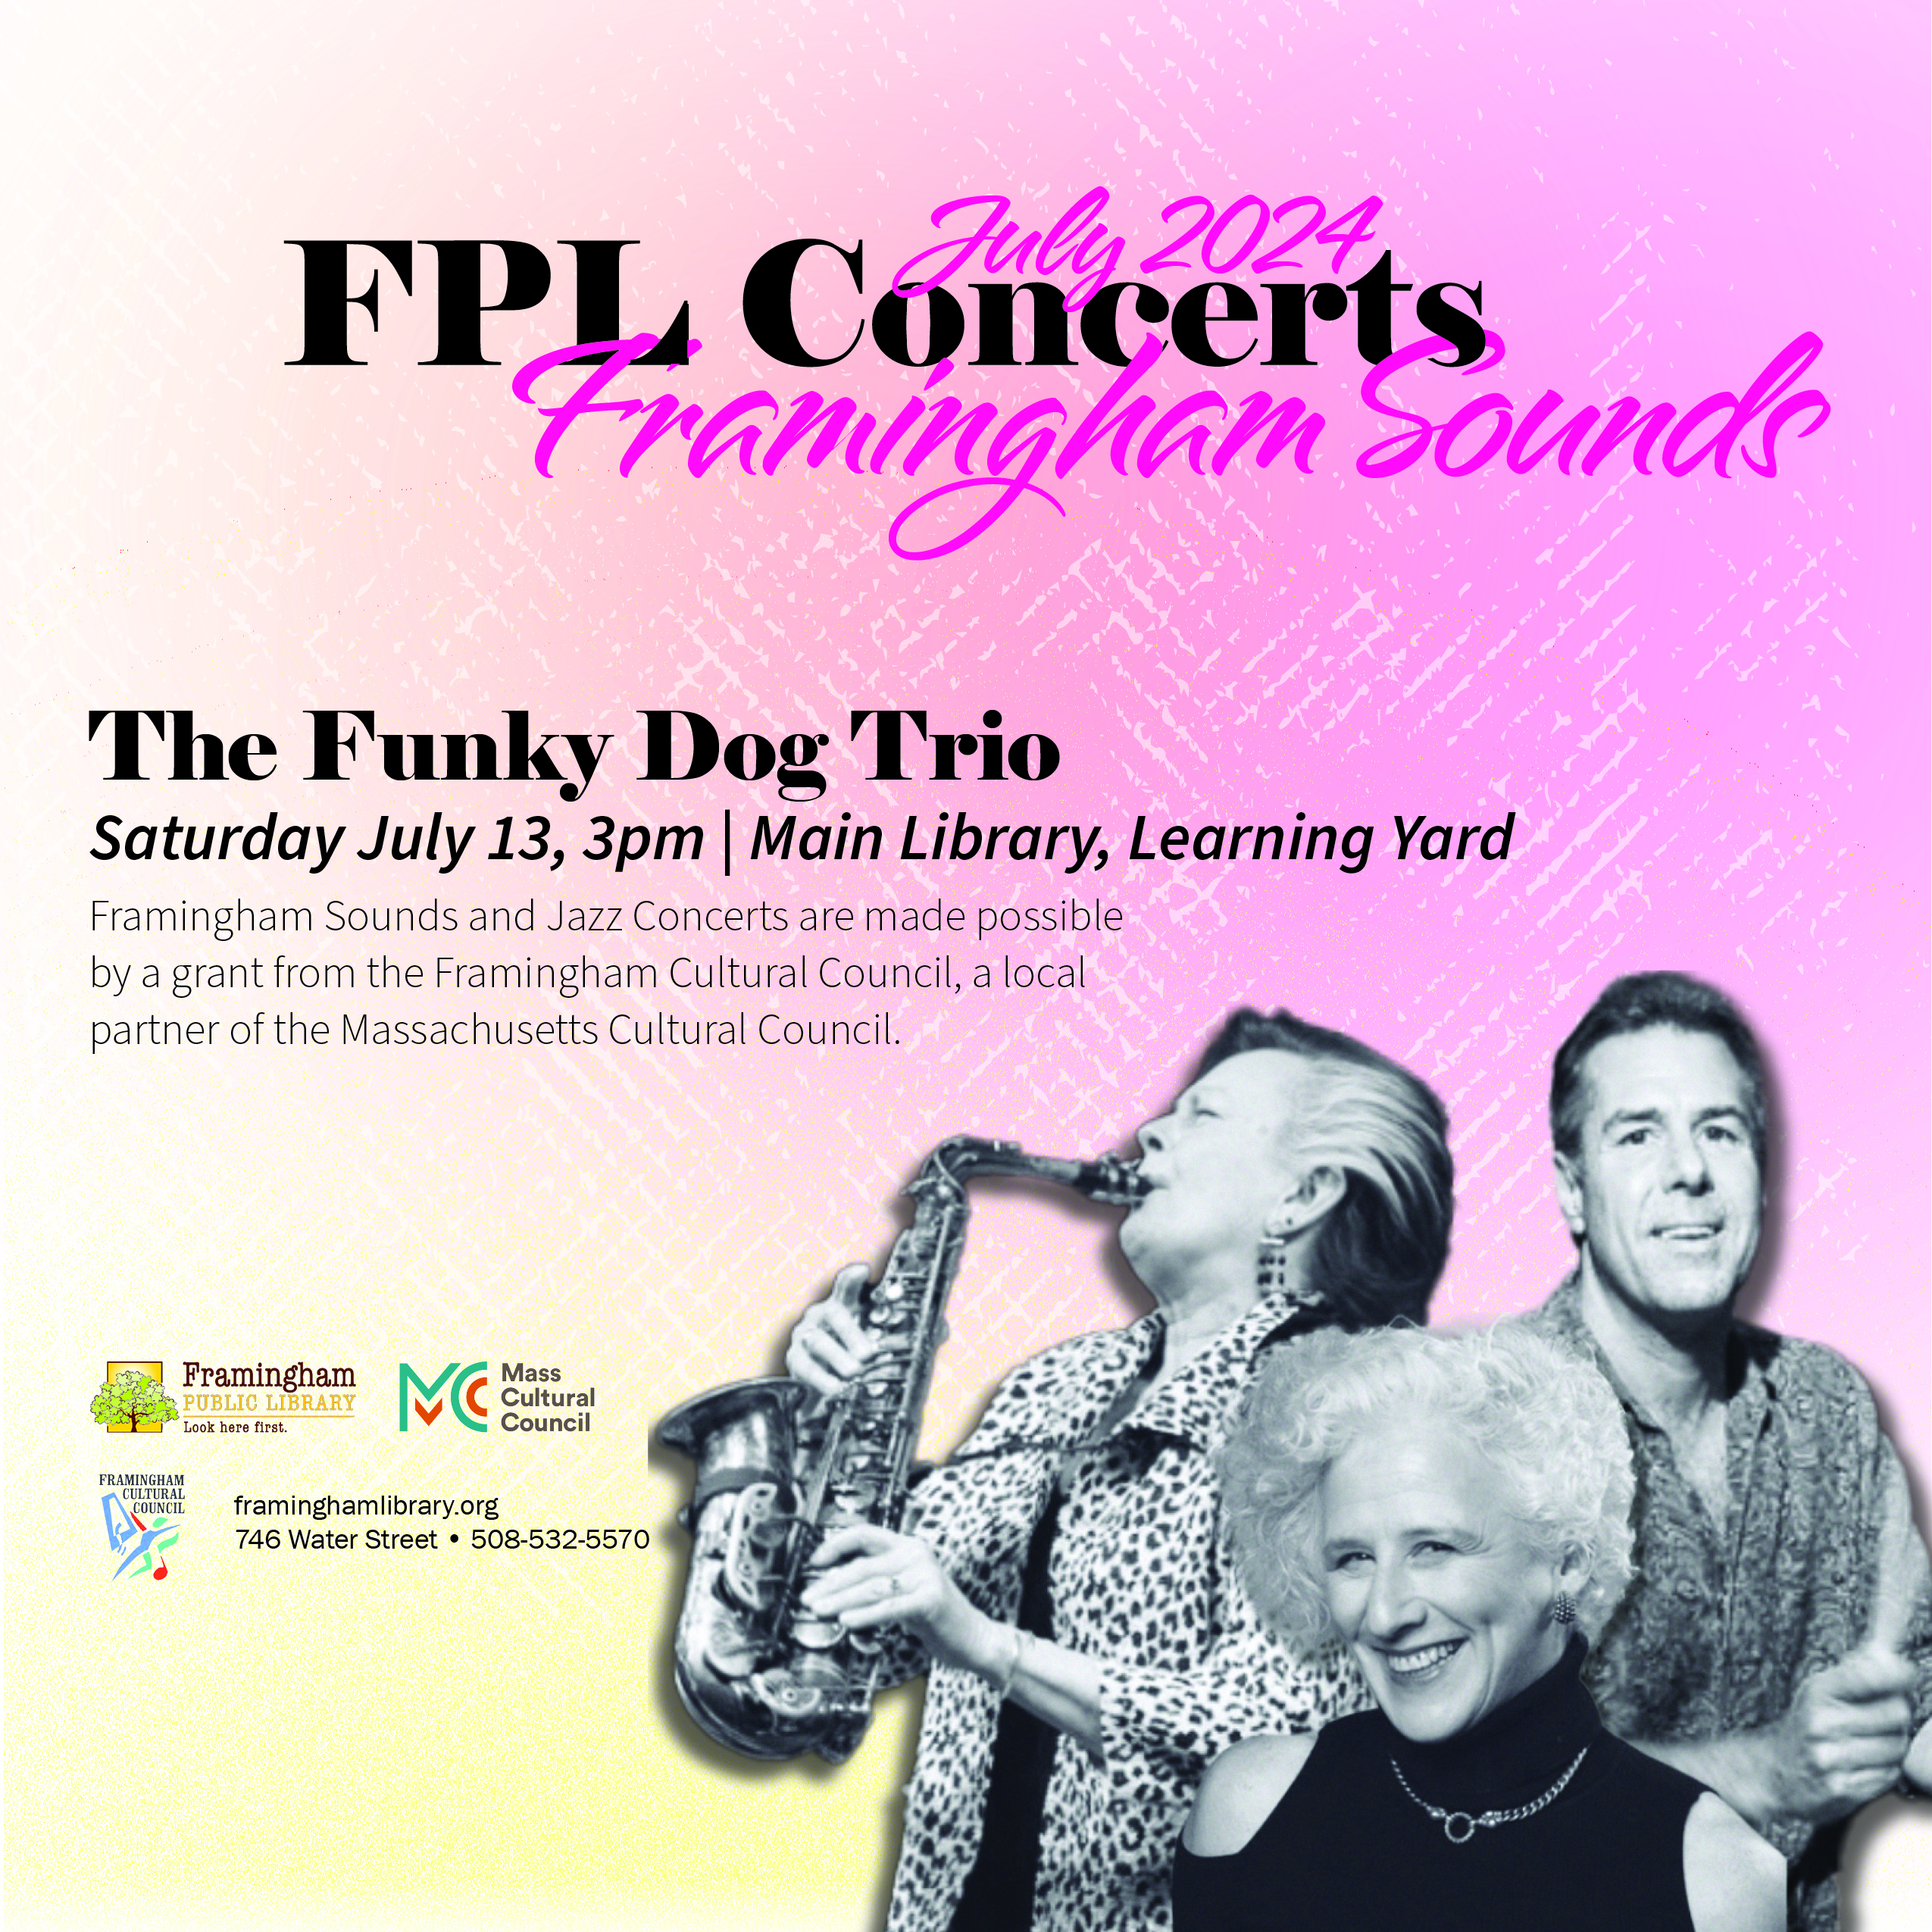 Framingham Sounds Concert: The Funky Dog Trio thumbnail Photo